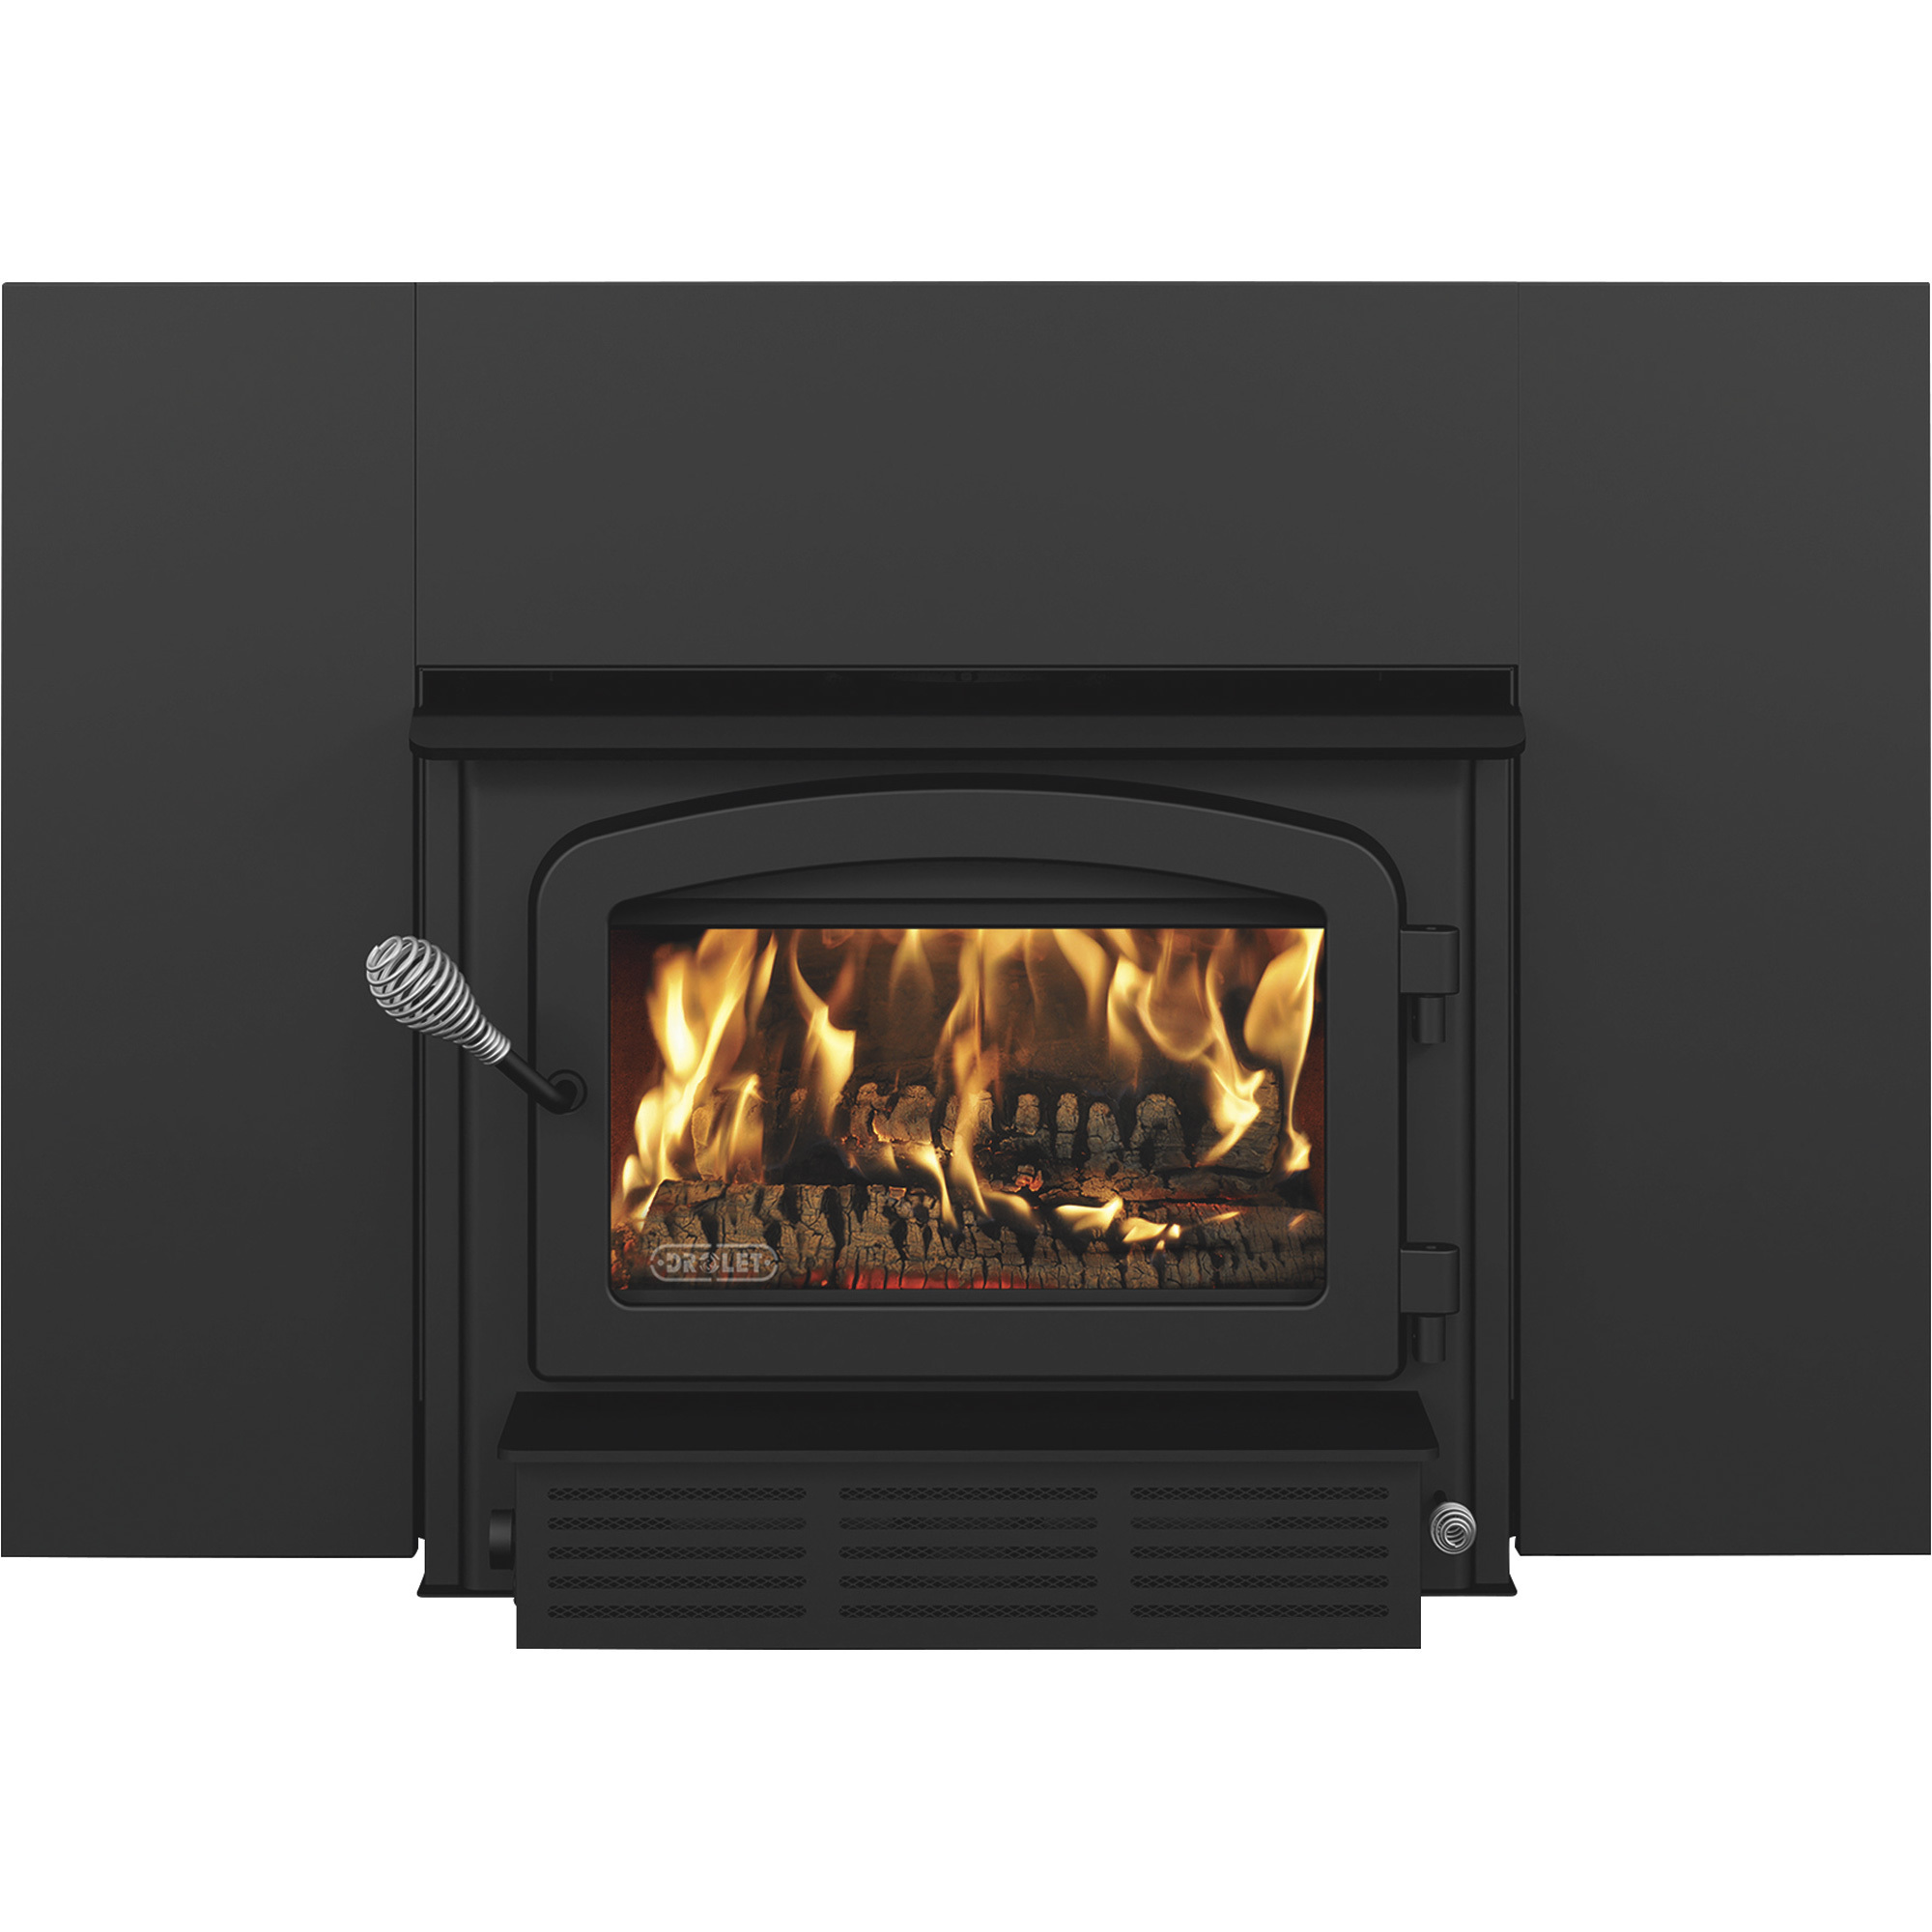 Drolet Escape 1500 Wood Stove Insert with Blower, 65,000 BTU, EPA 2020 Certified, Model DB03137